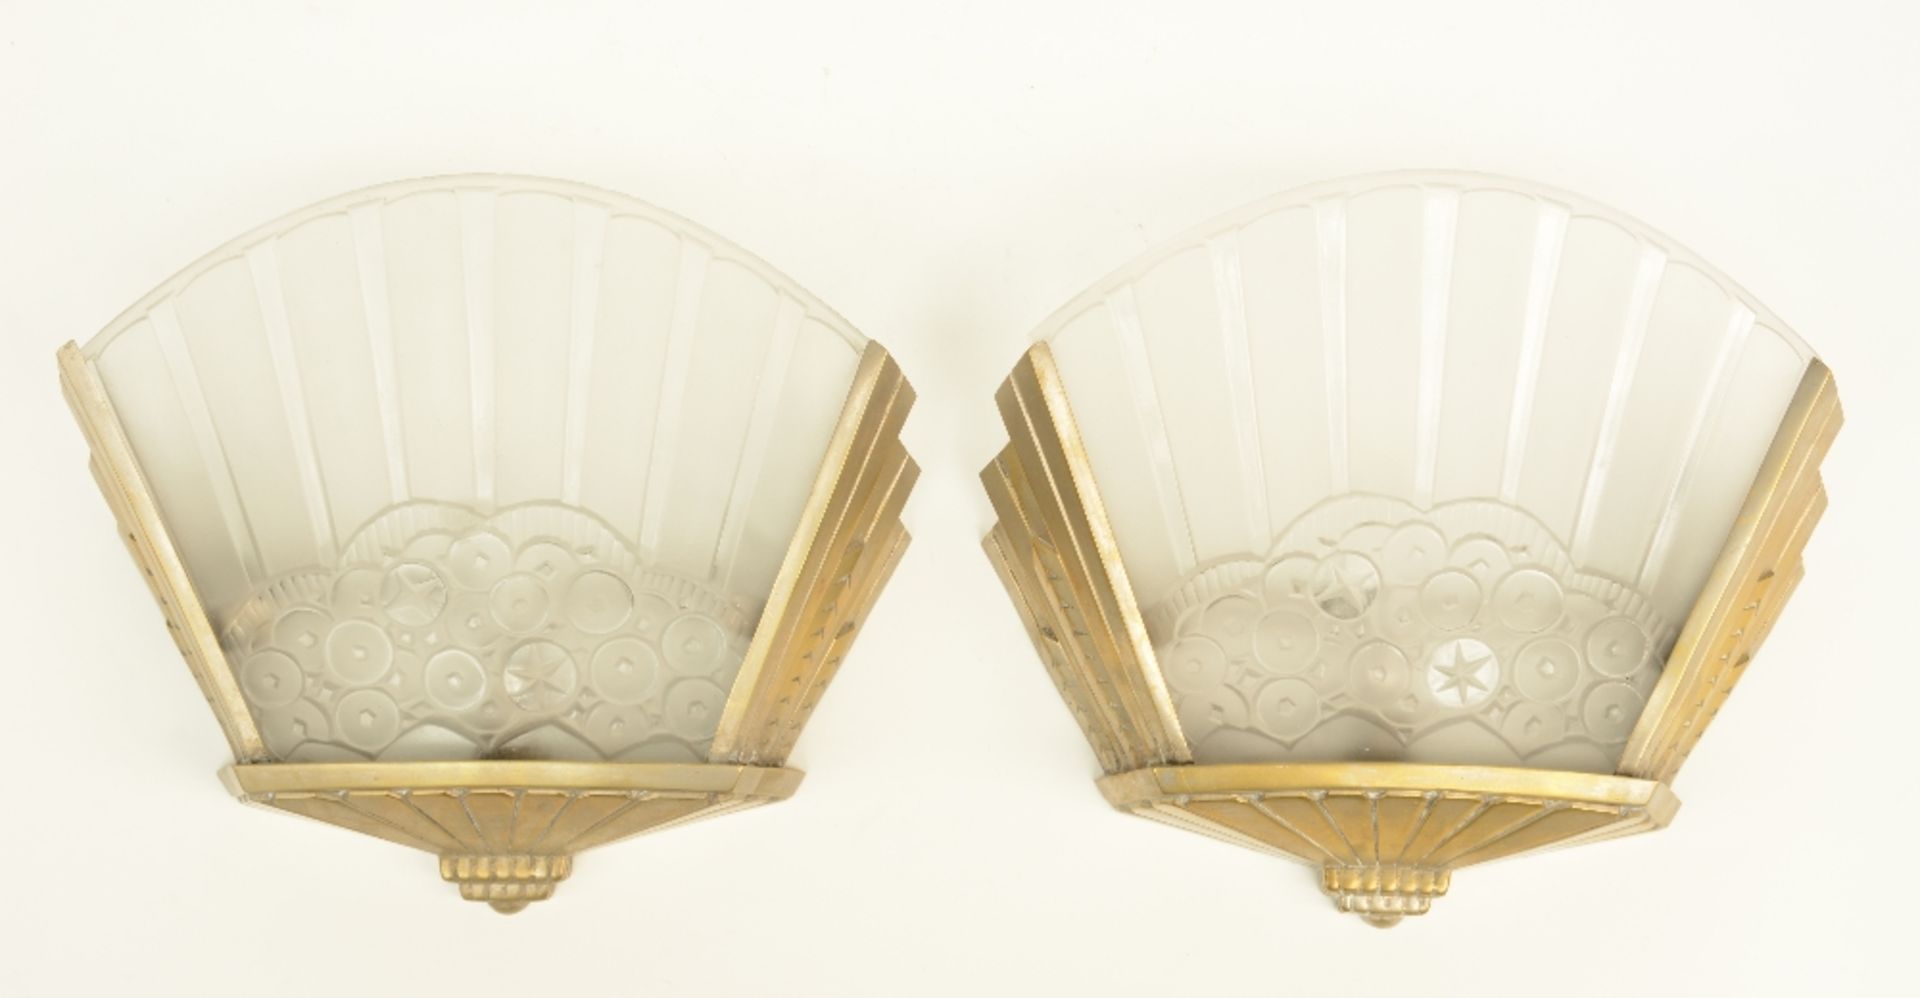 Two brass, chrome plated Art Deco wall lights, the light shades in cast and matted glass, H 24,5 cm